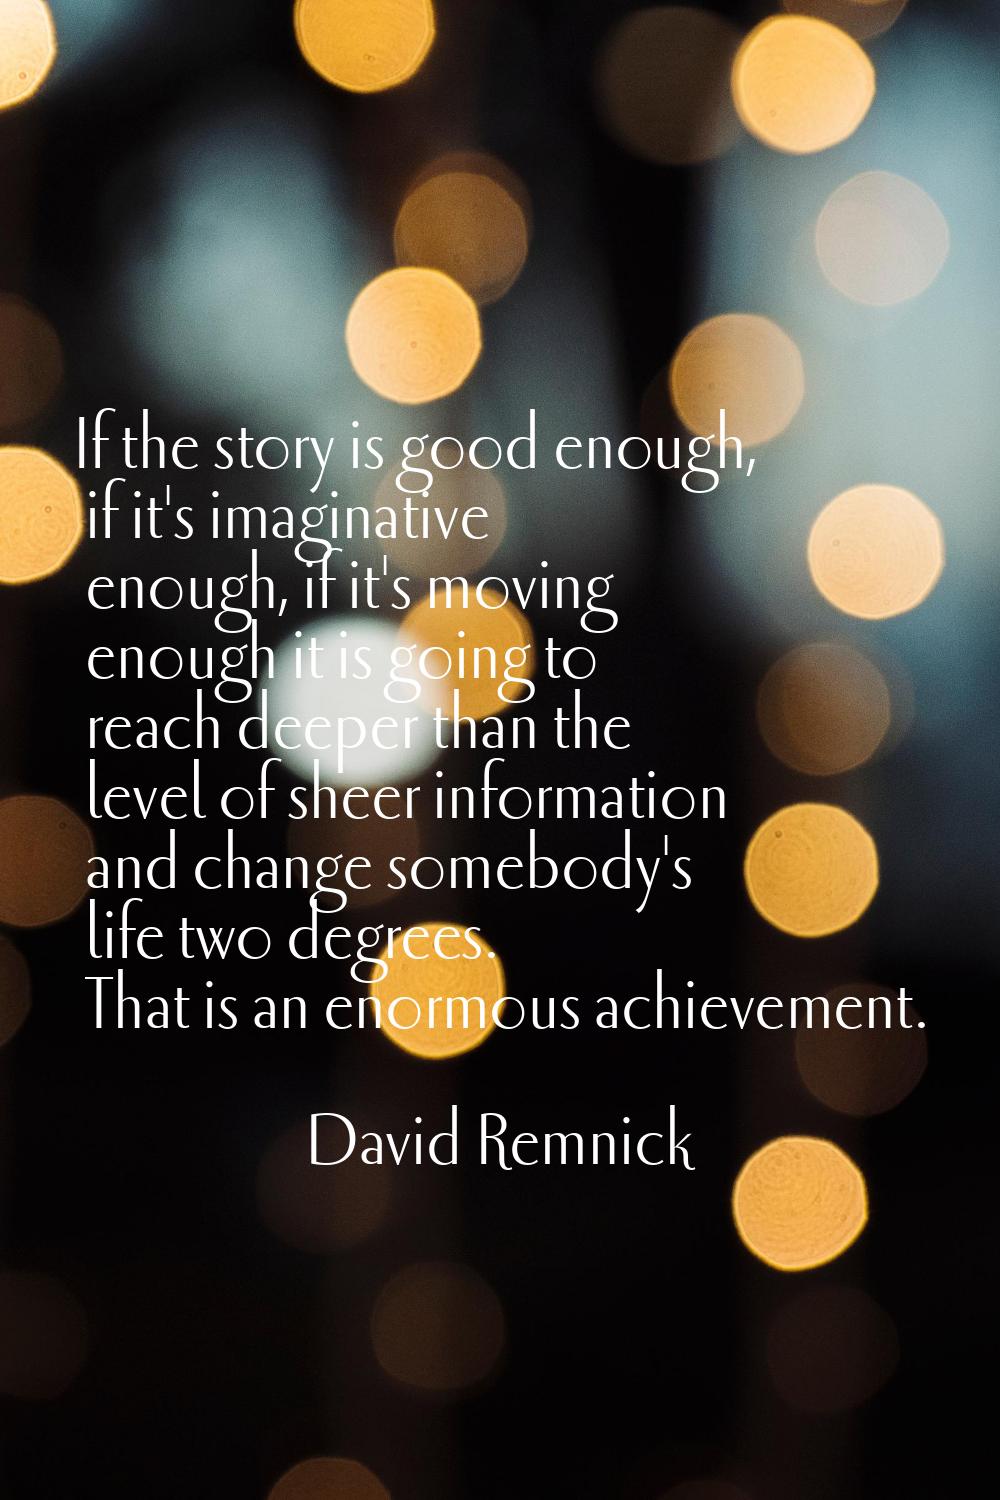 If the story is good enough, if it's imaginative enough, if it's moving enough it is going to reach